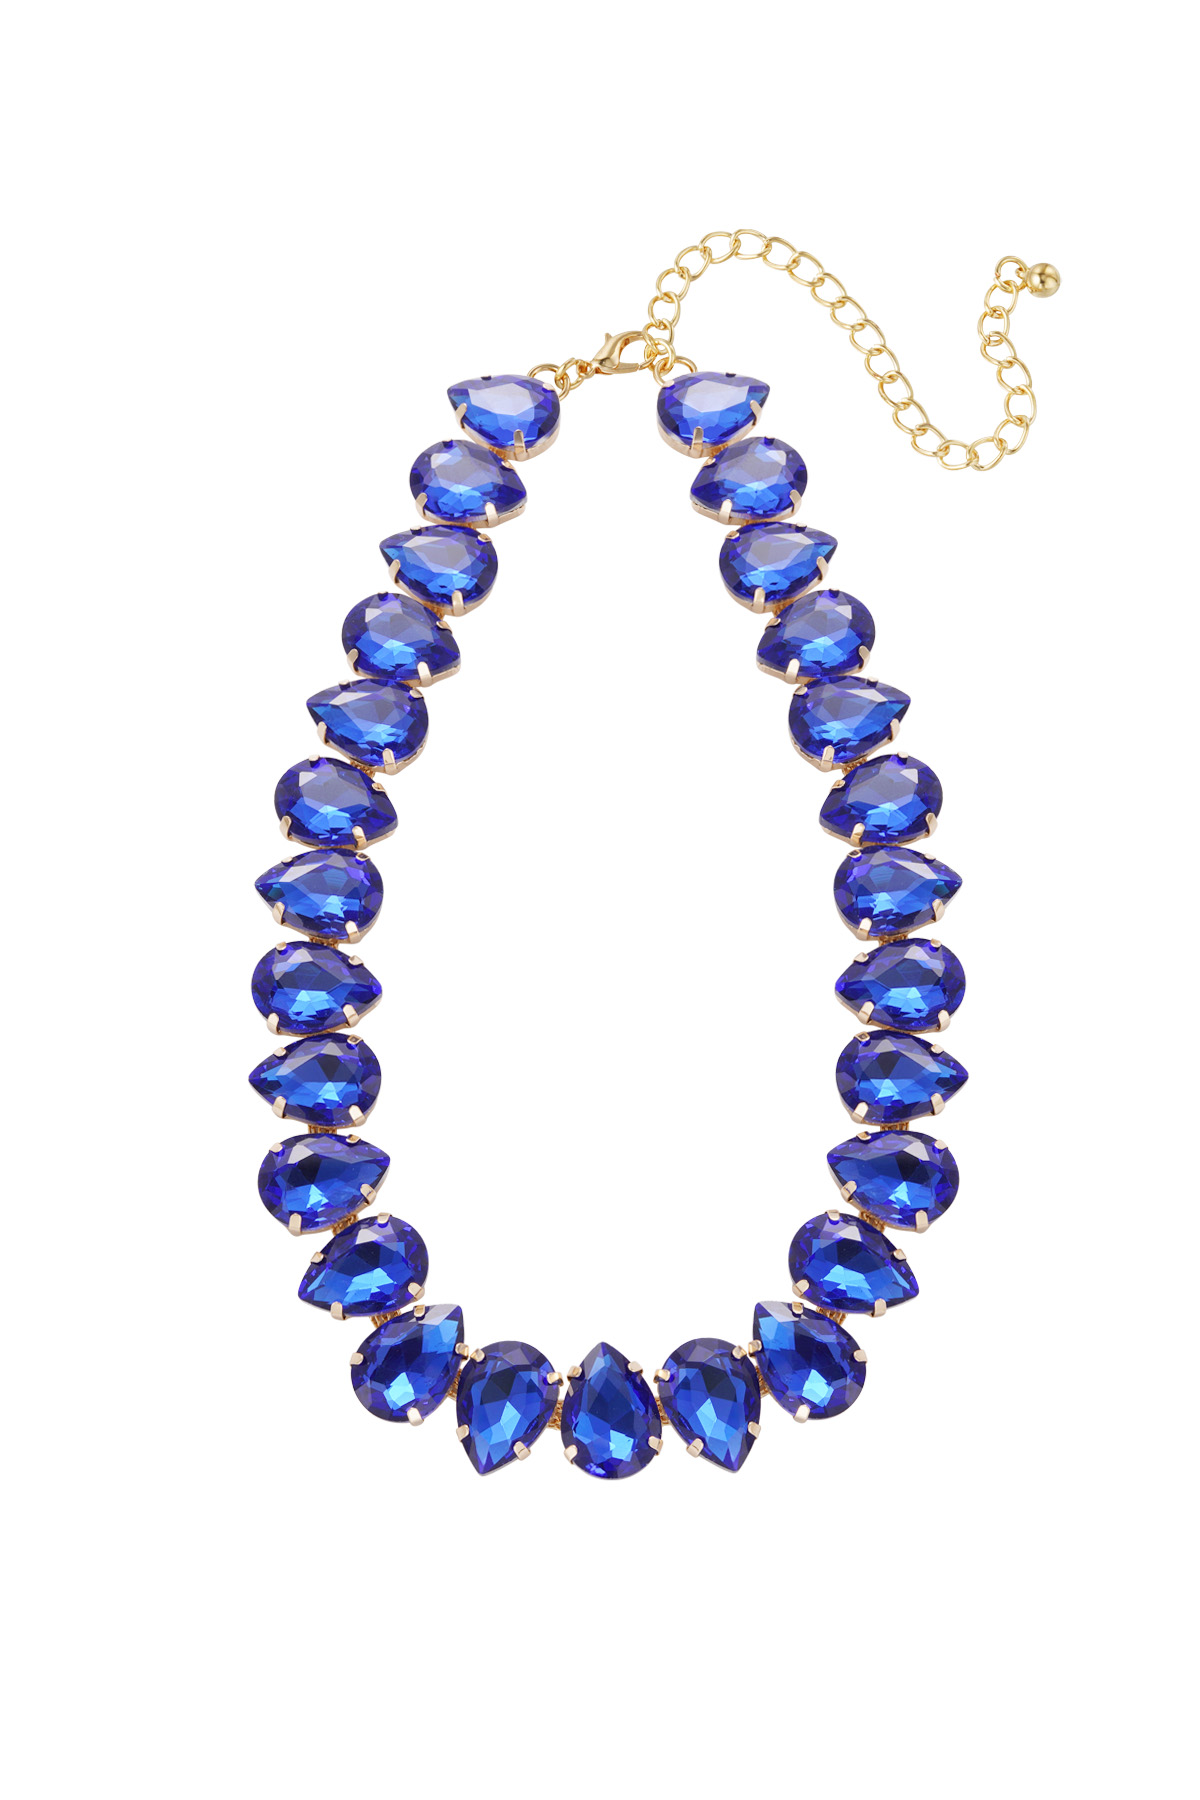 Necklace large beads - blue h5 